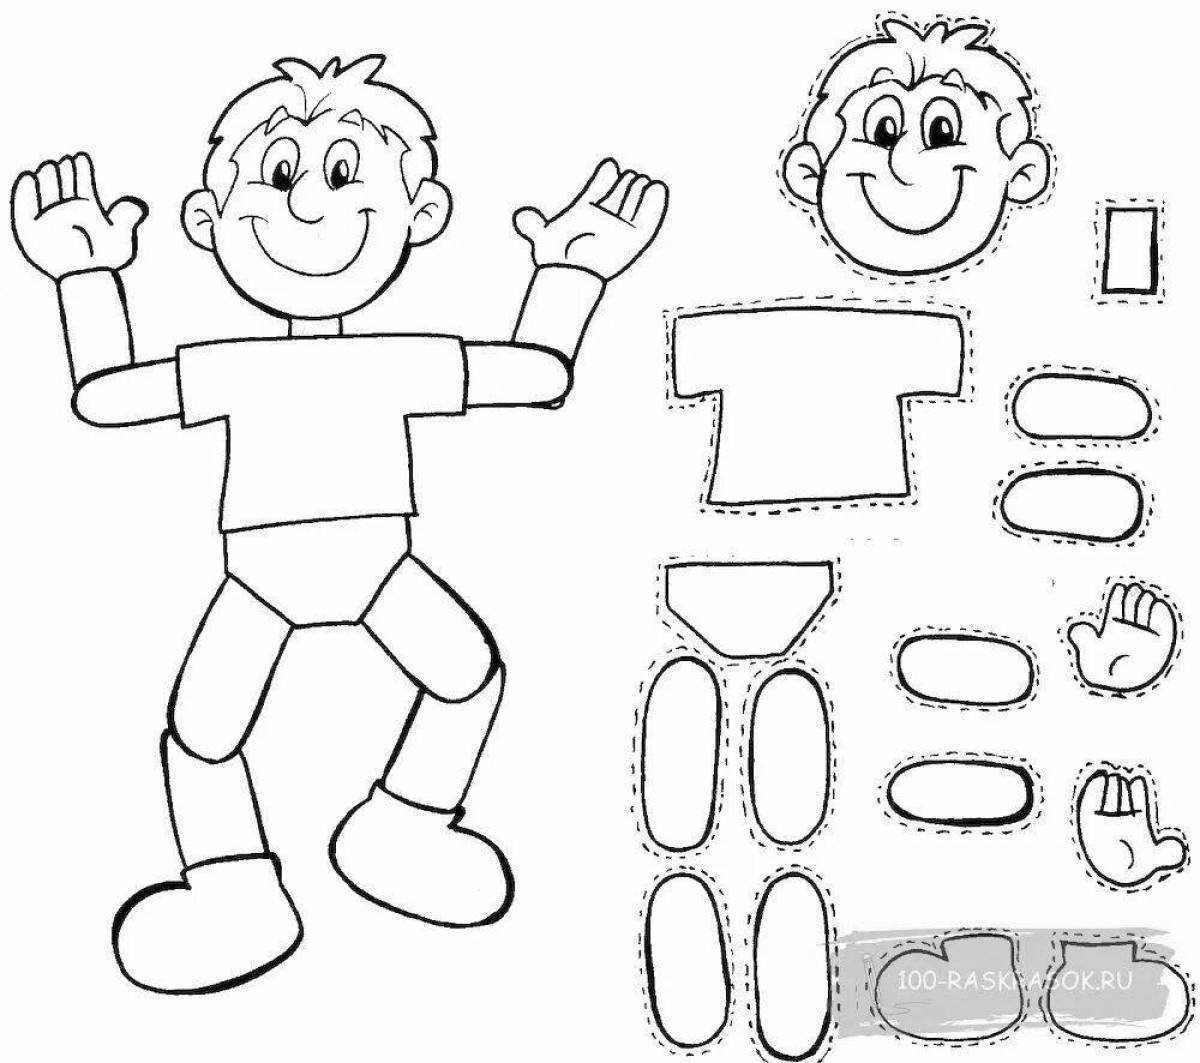 Fun coloring of human body part for kids